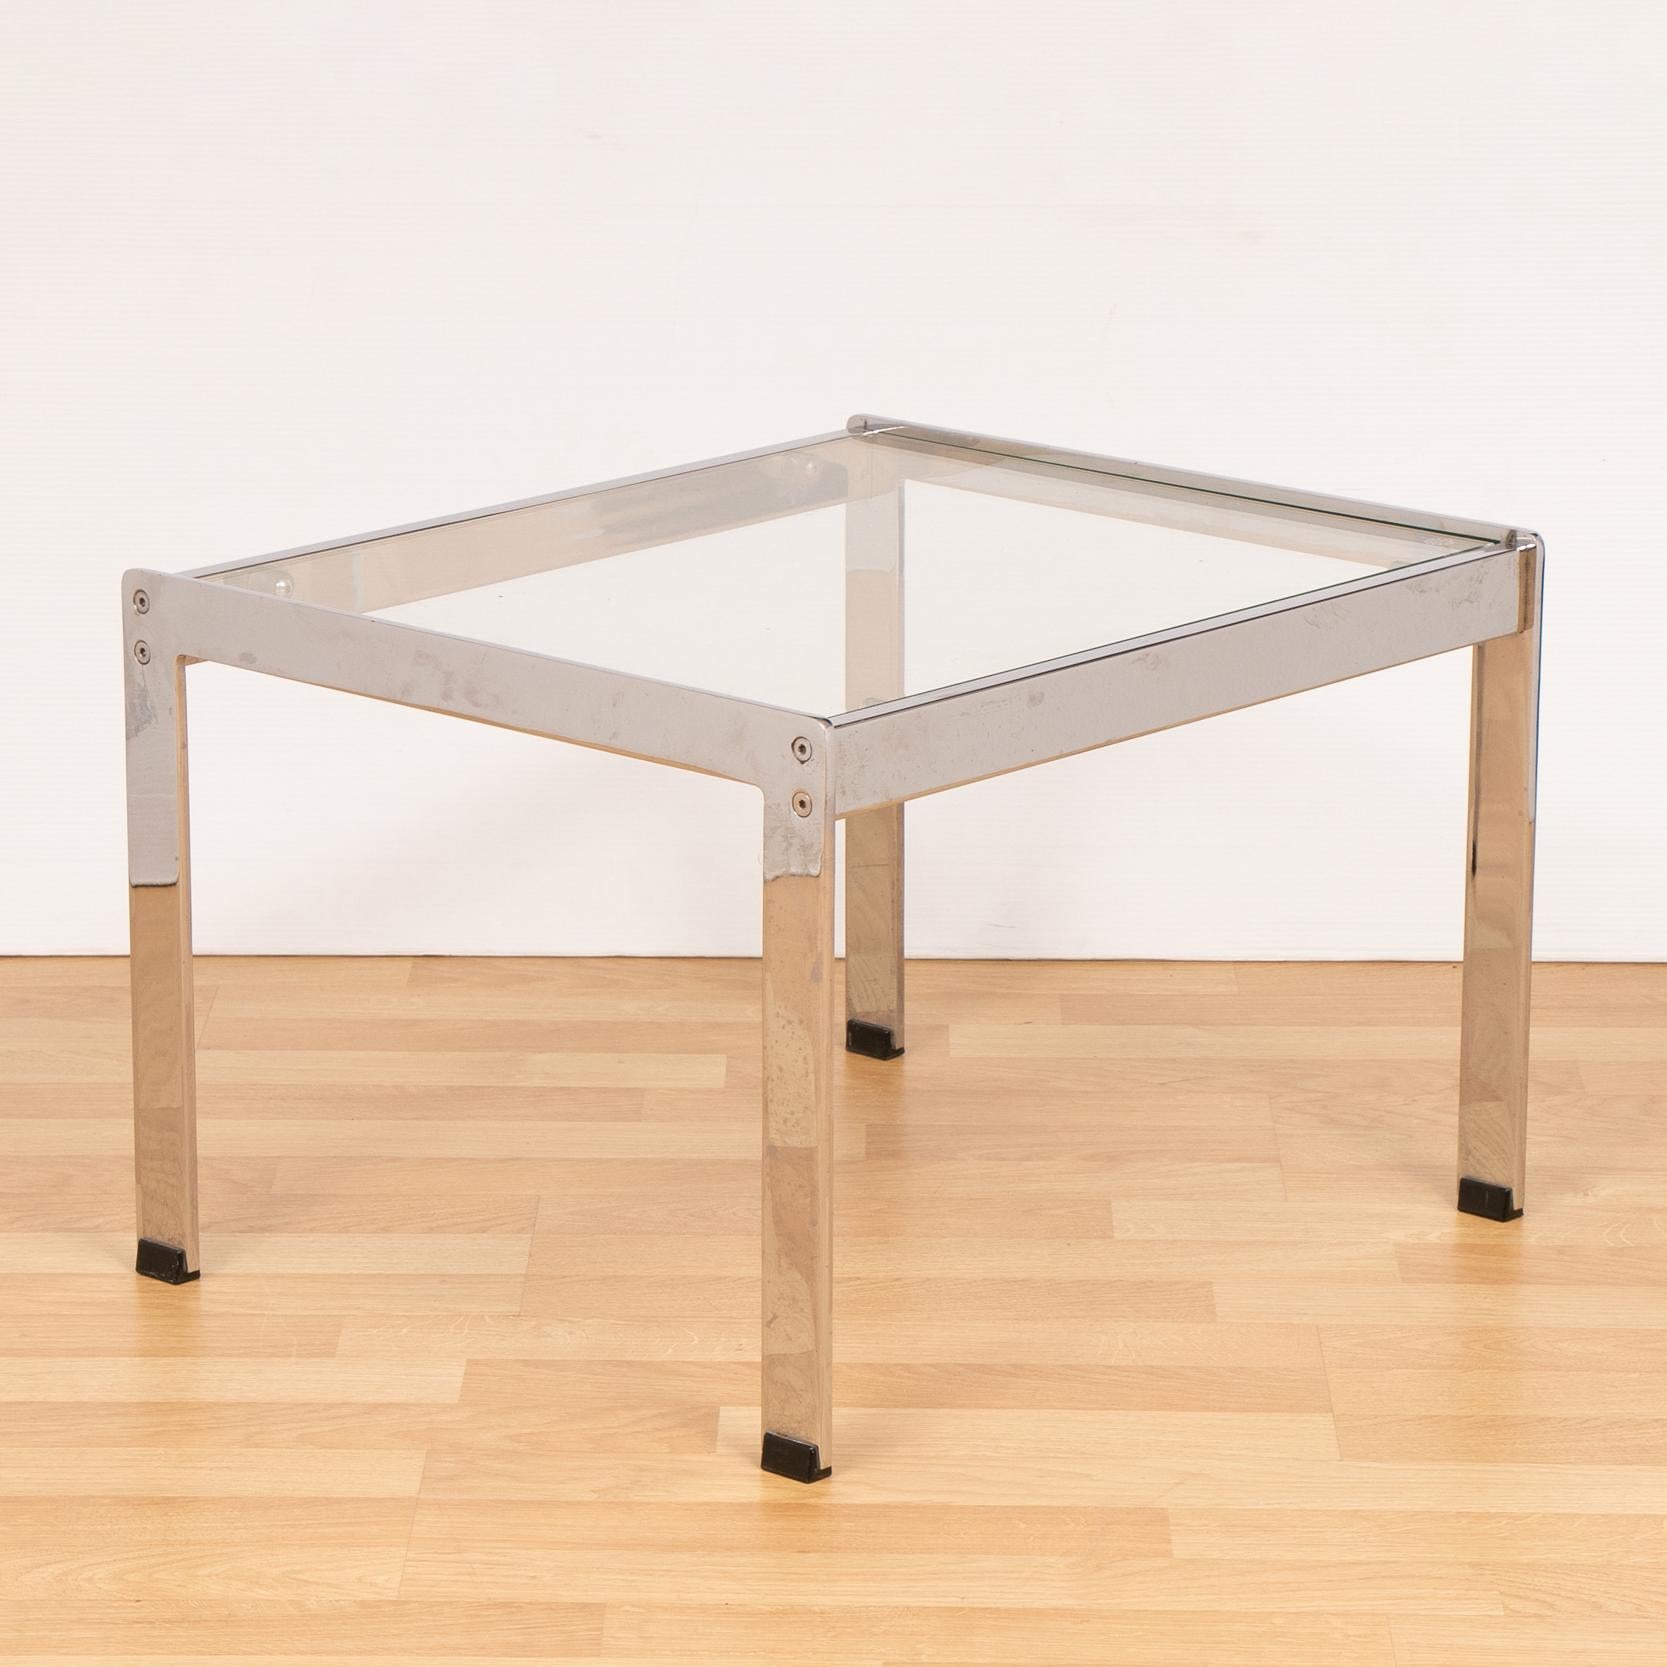 1970s chrome and glass coffee table designed by Richard Young for Merrow Associates. Solid and well made with toughened glass which has just been replaced. There are some minor signs of wear and tear to the chrome which you'd expect from an item of